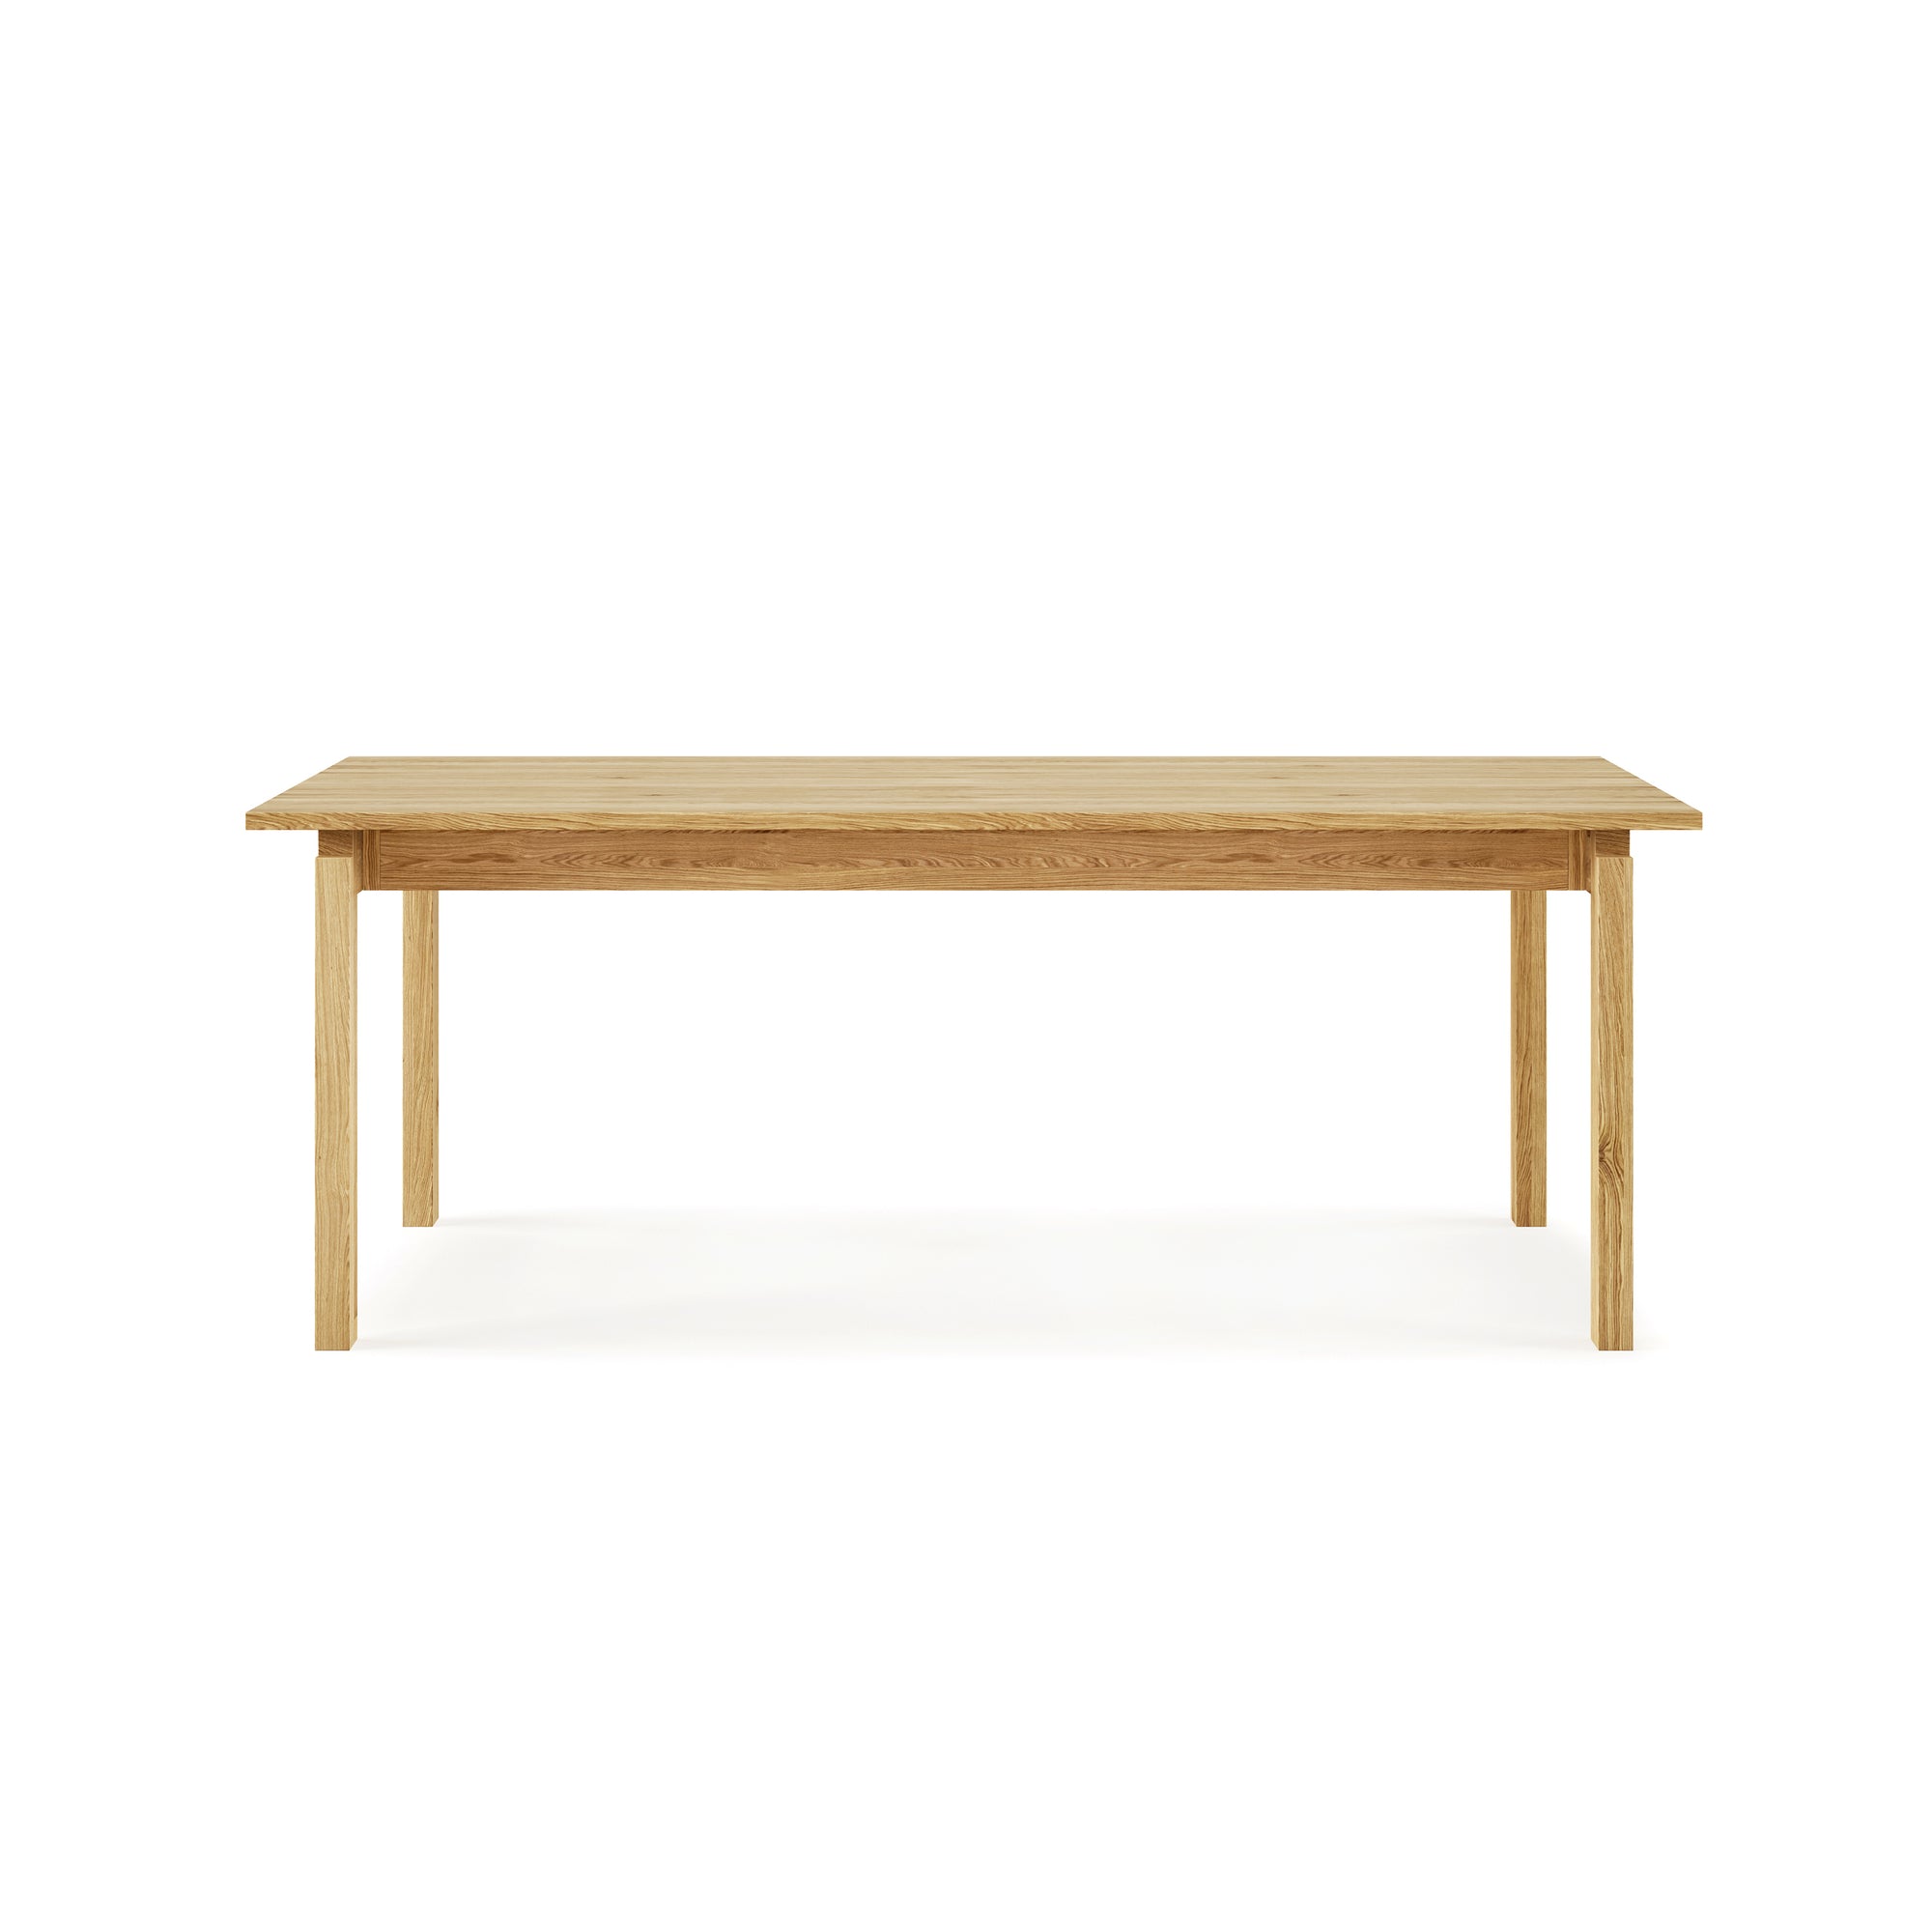 Gus* Modern Annex Extendable Dining Table